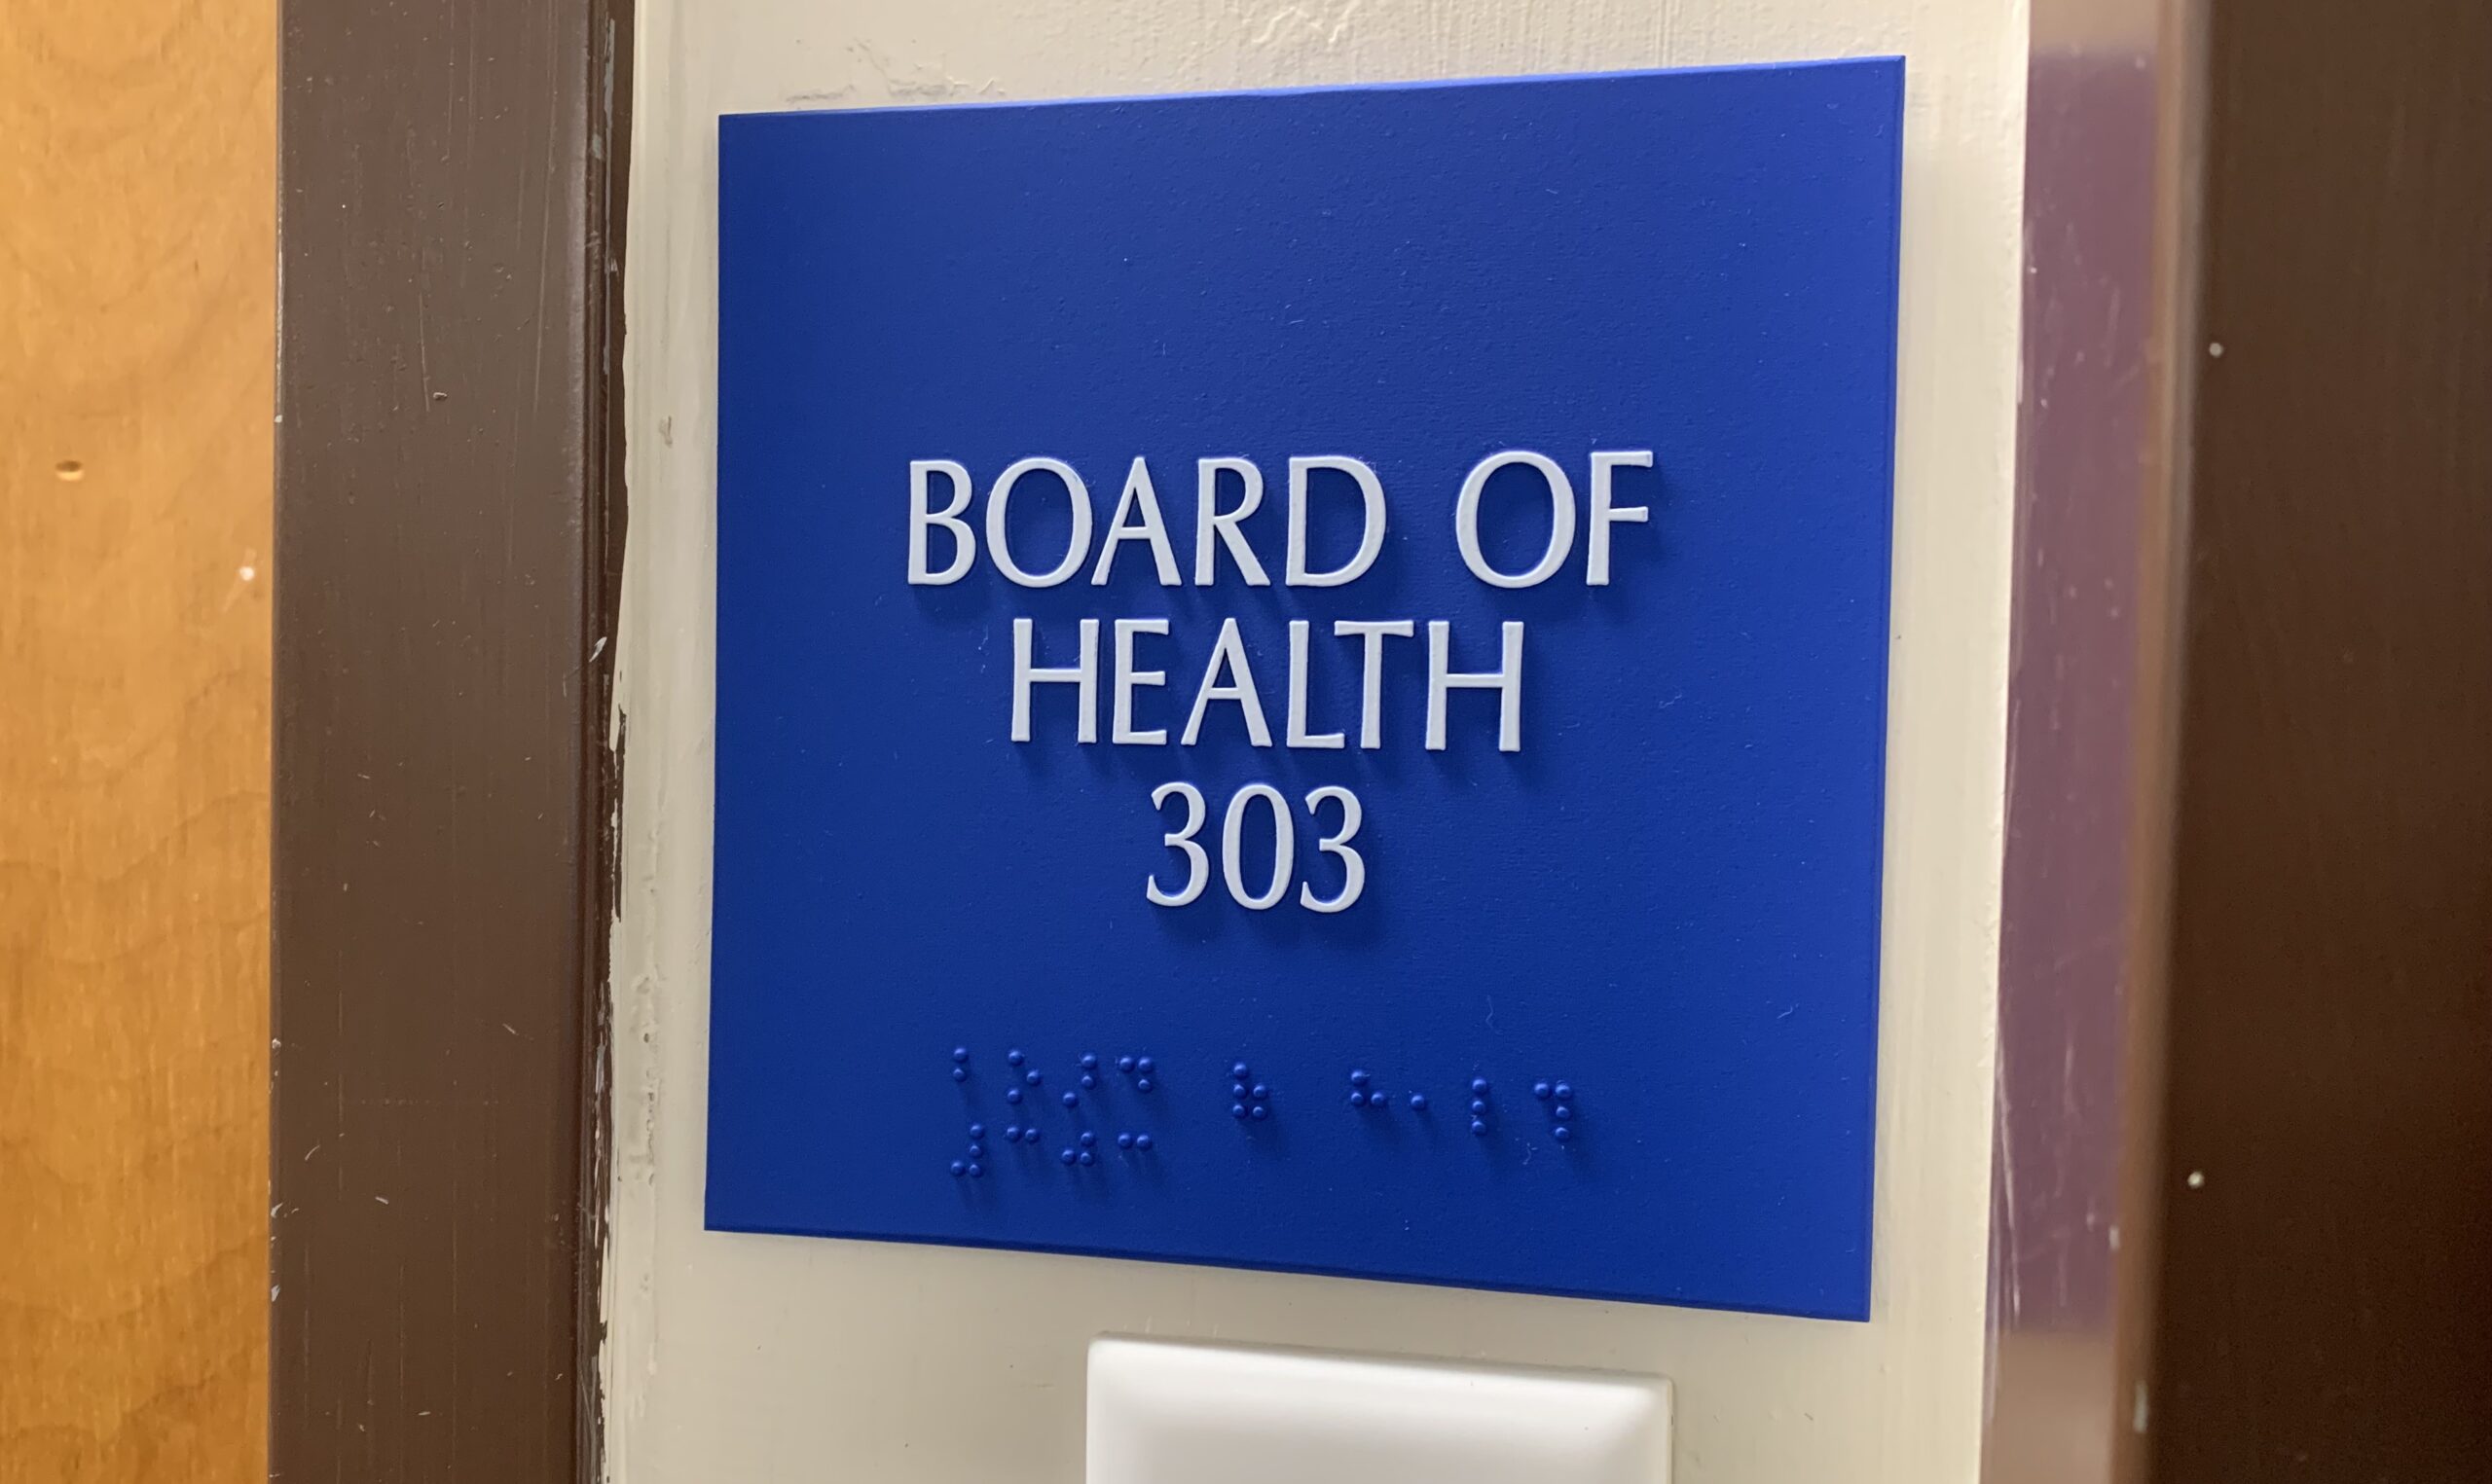 Board of Health roundup: Health Department clarifies communication about YMCA potable water quality